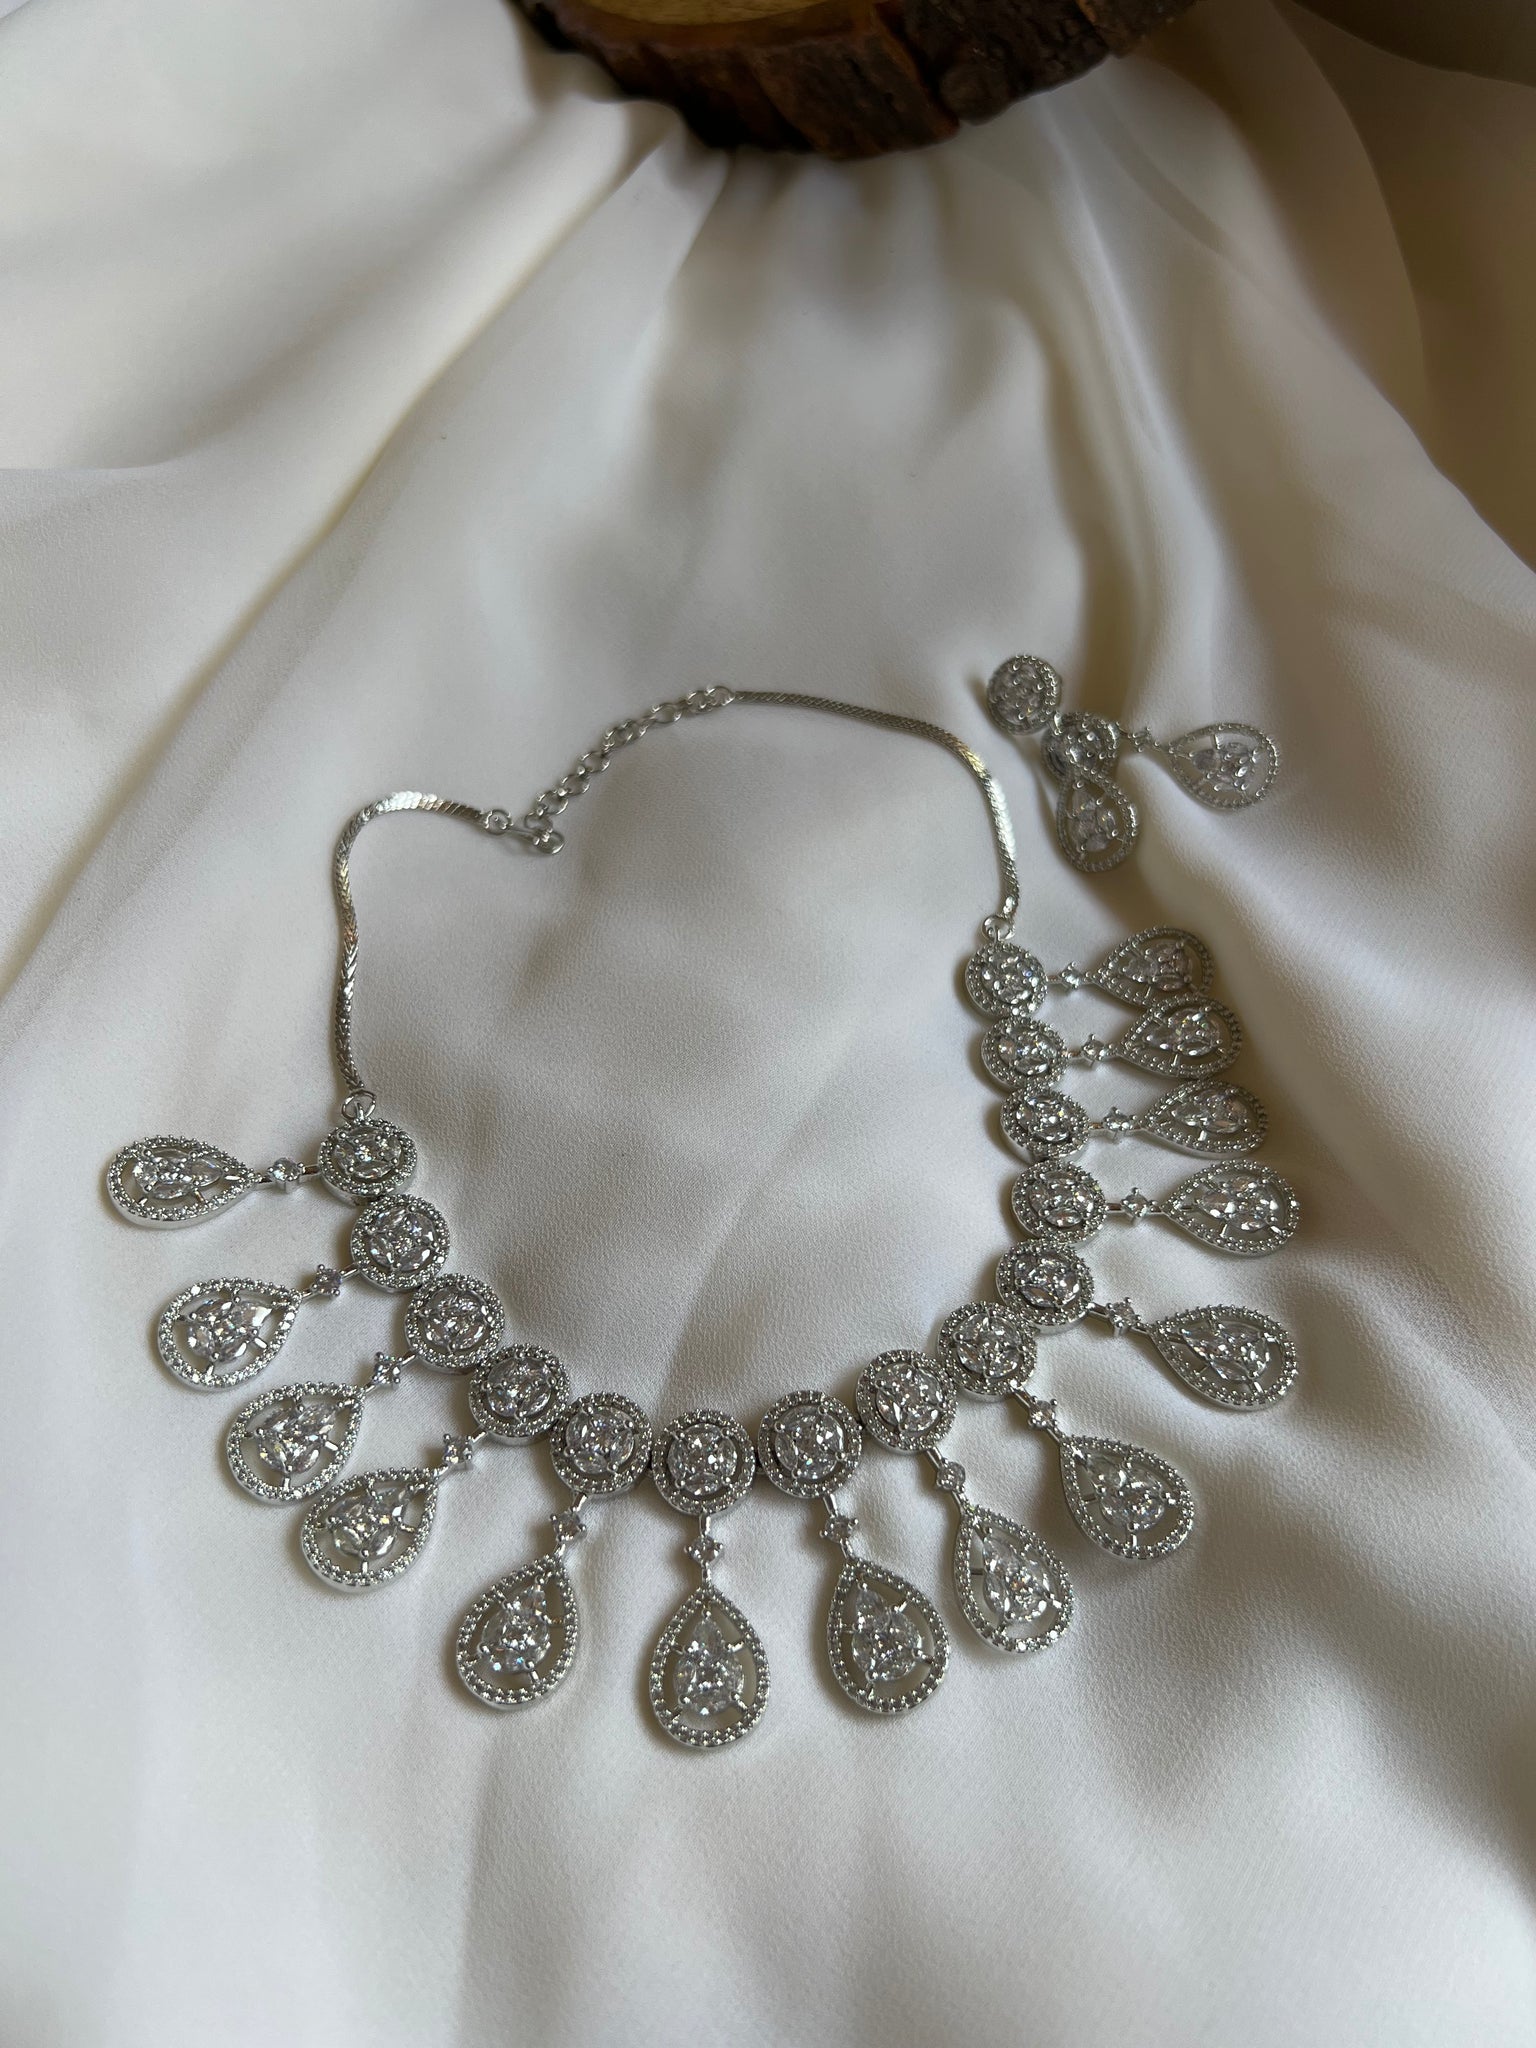 Ad oval princess necklace with studs